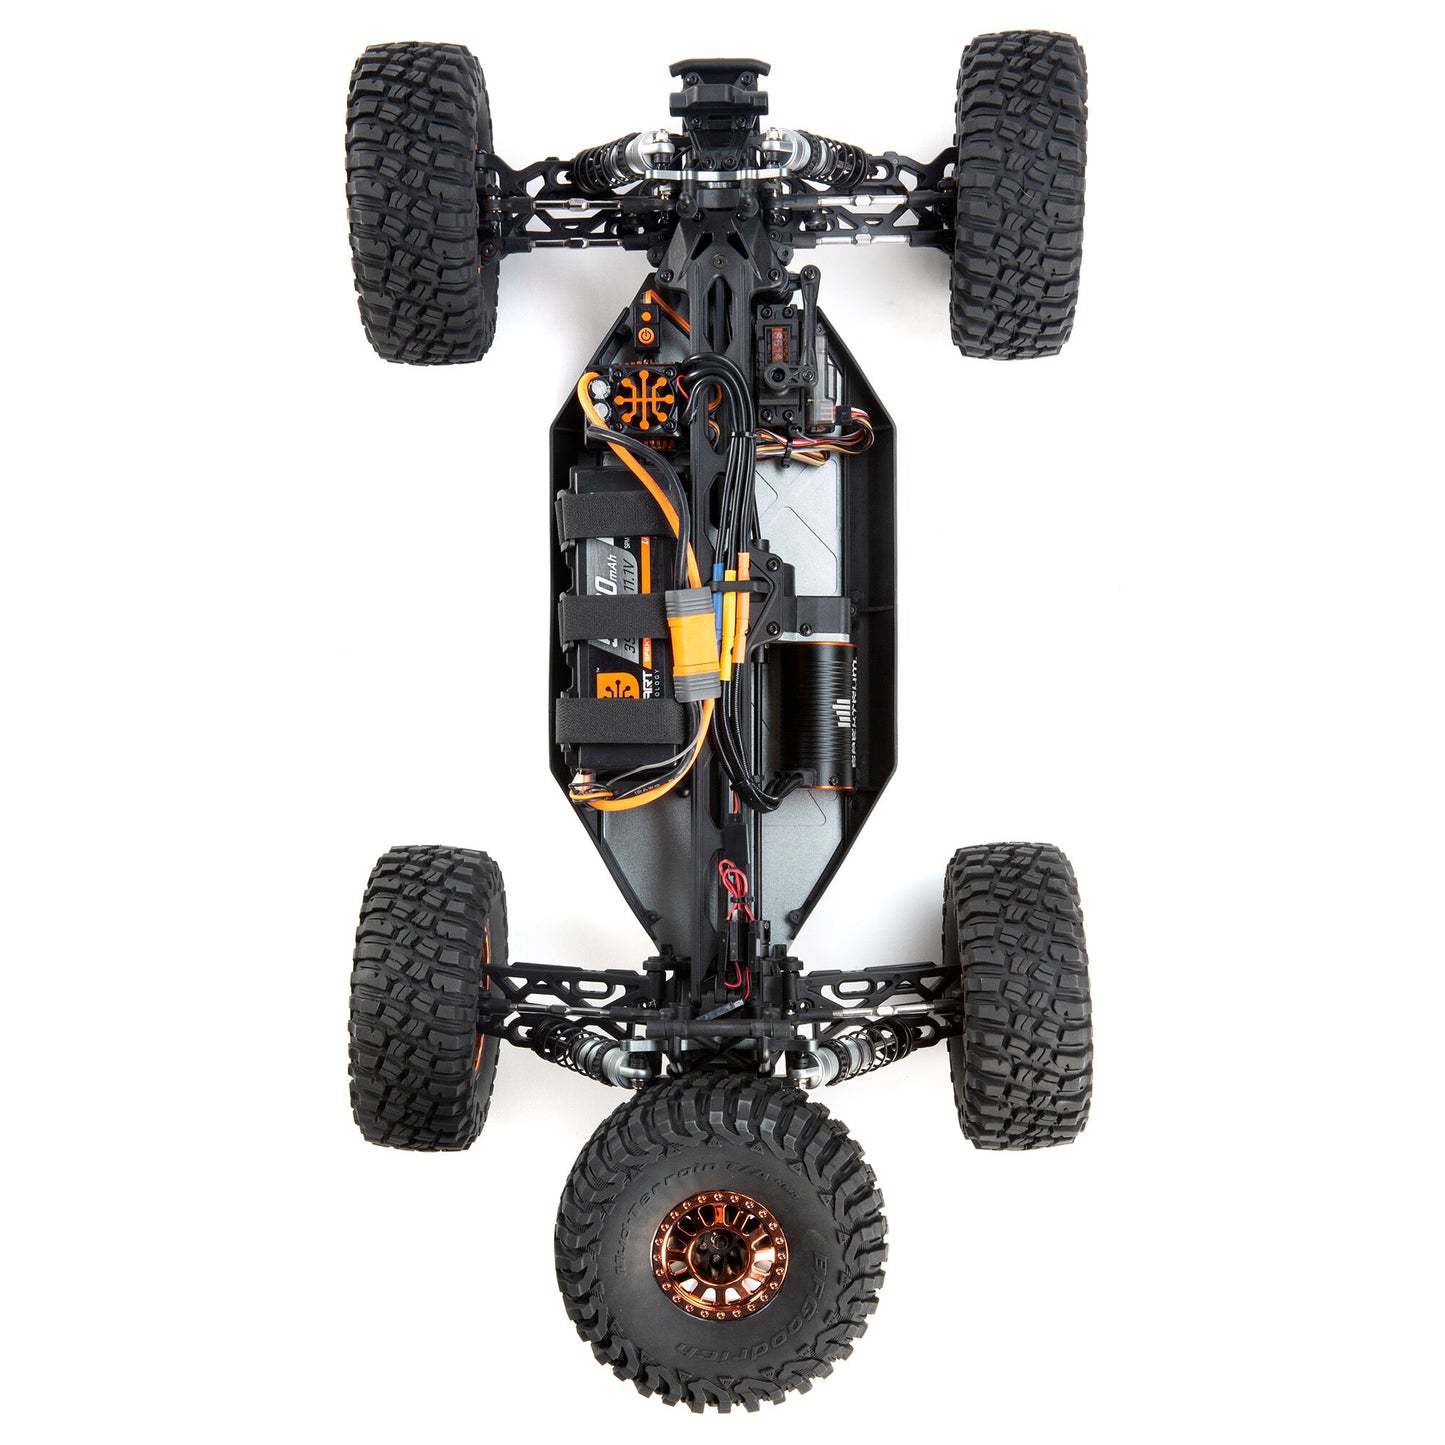 1/10 Lasernut U4 4WD Brushless RTR with Smart and AVC, Blue